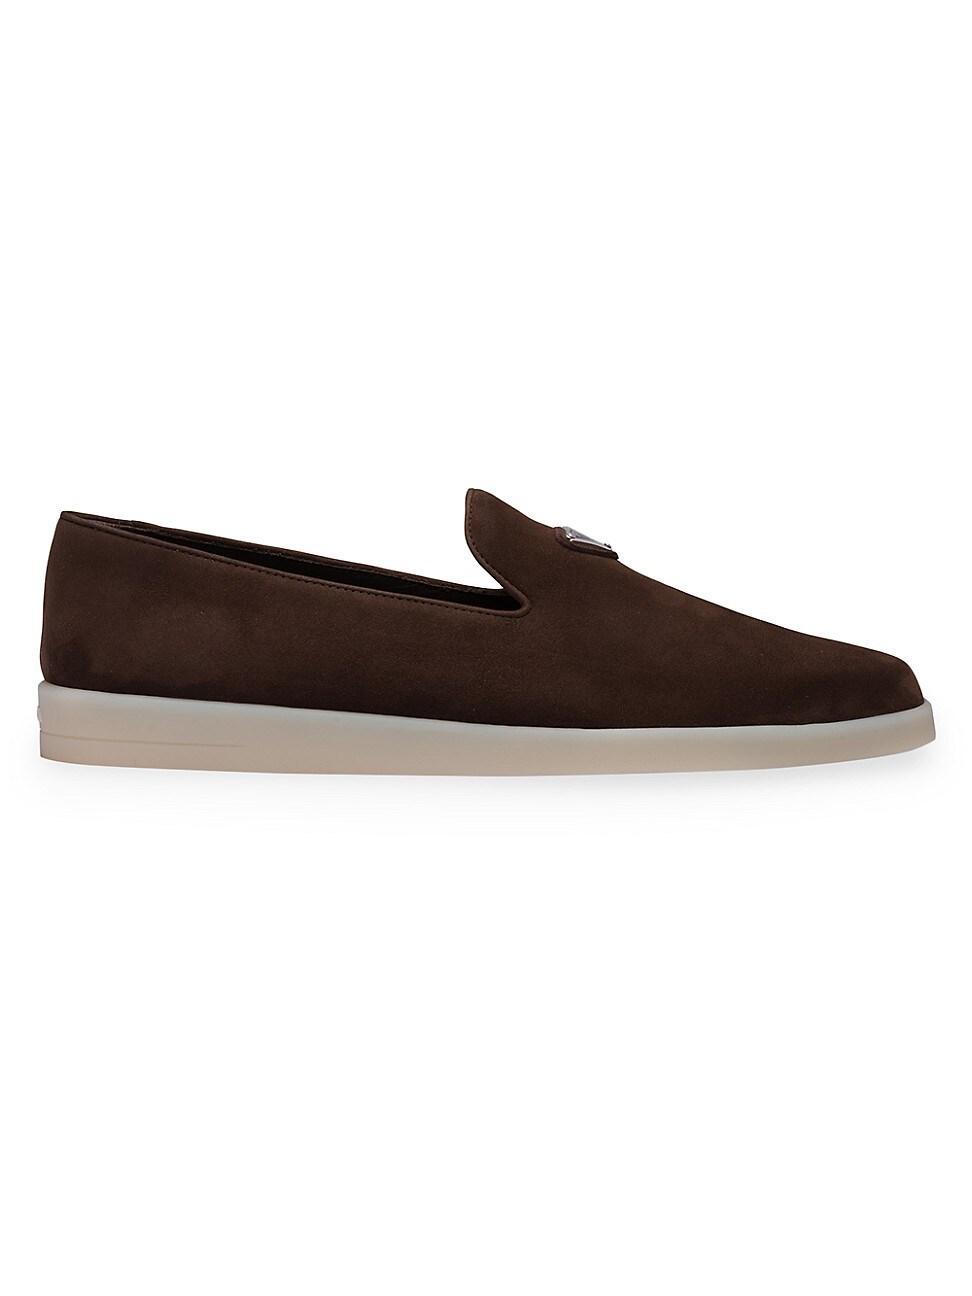 Mens Suede Slippers Product Image